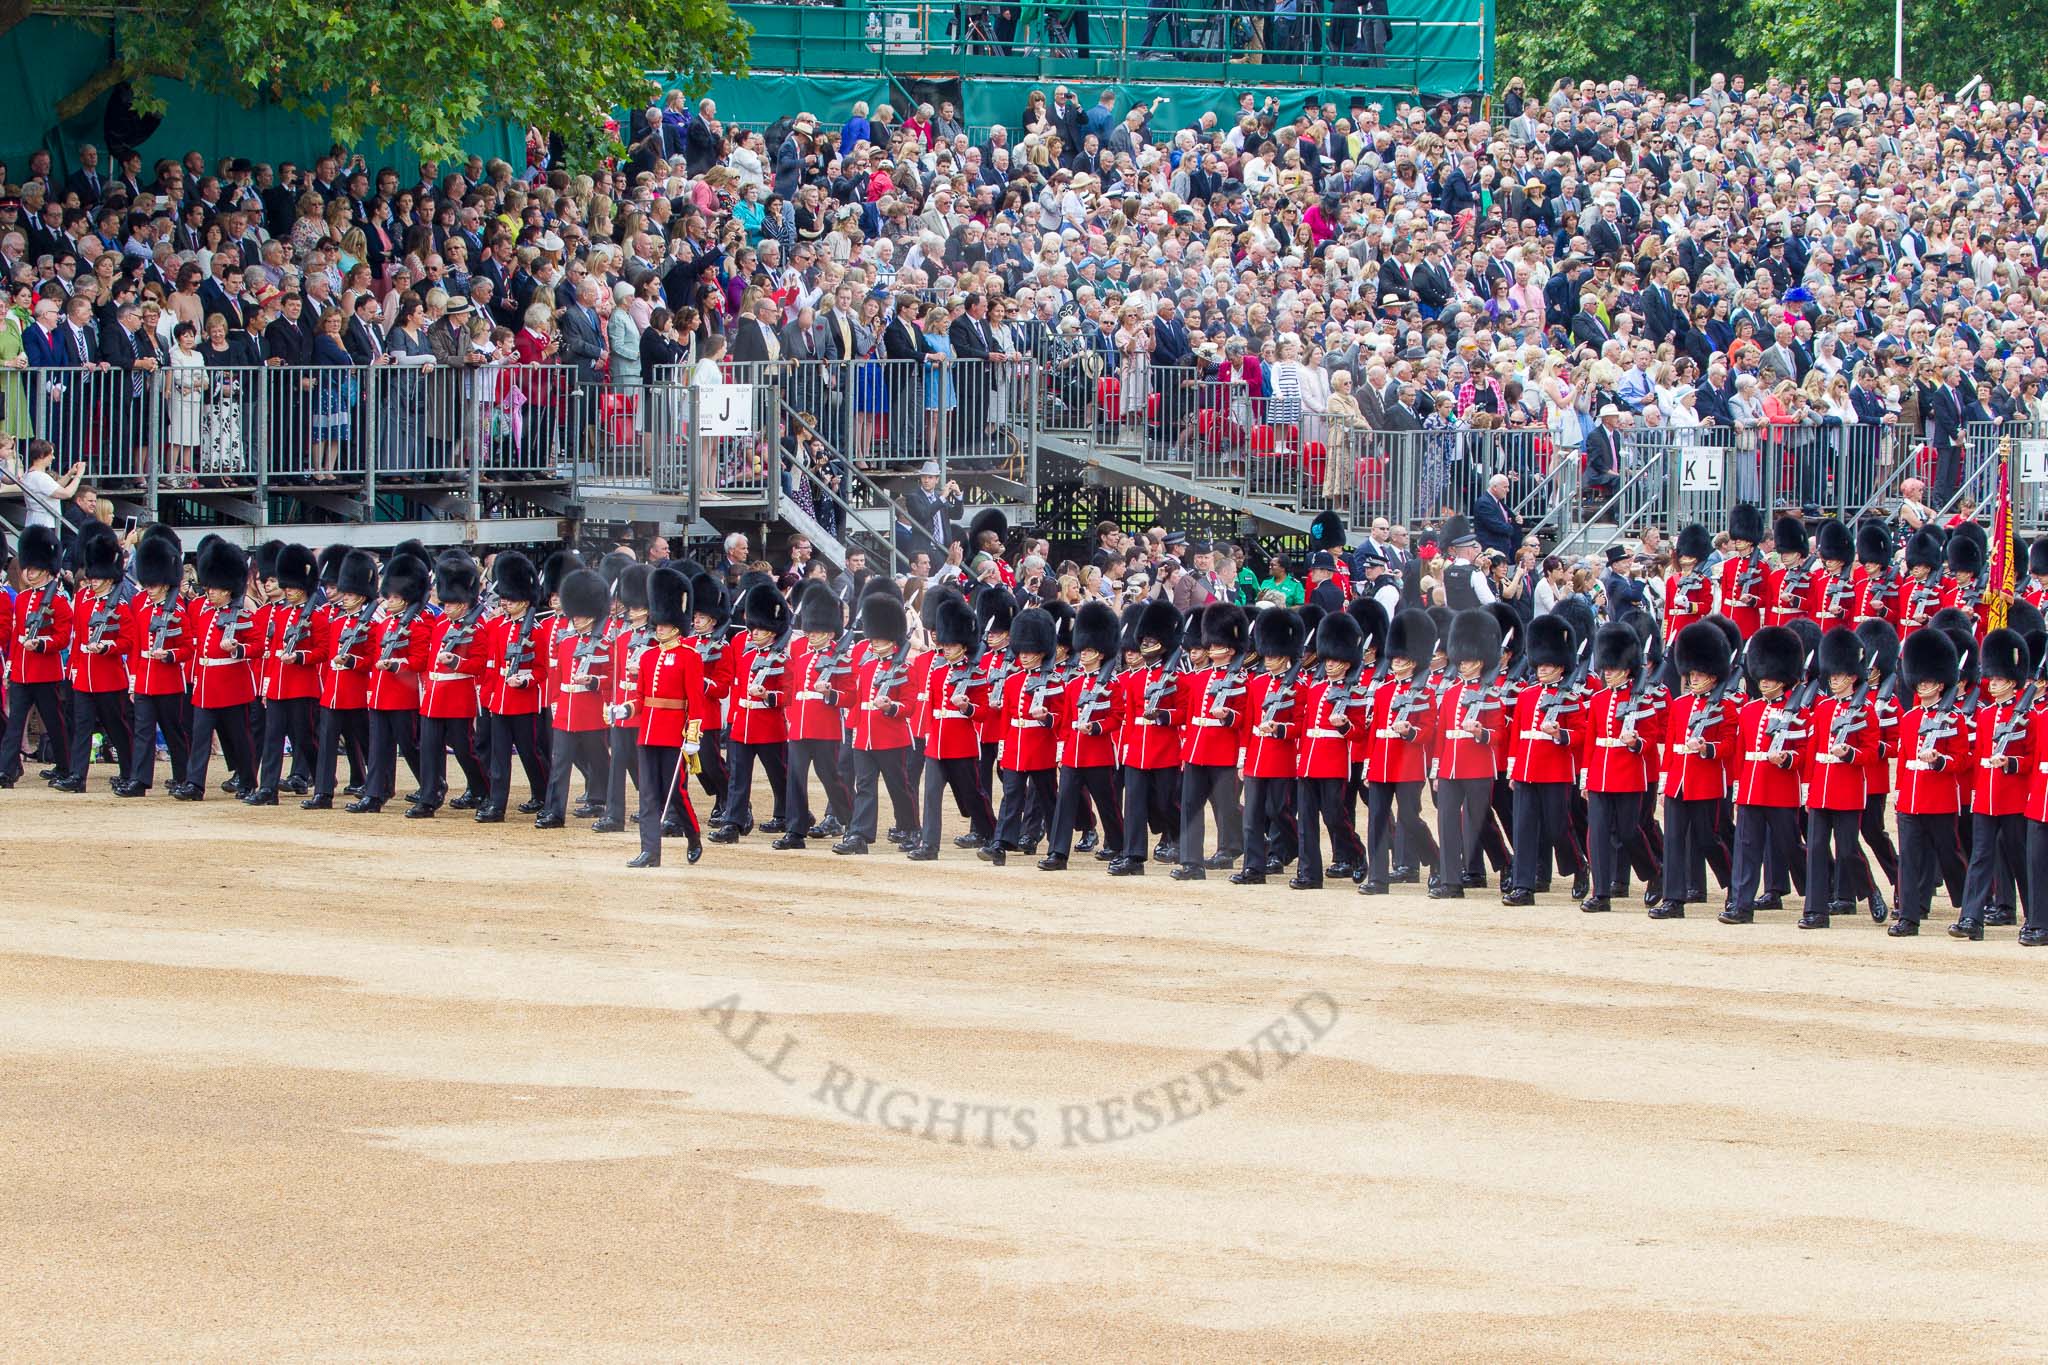 Trooping the Colour 2014.
Horse Guards Parade, Westminster,
London SW1A,

United Kingdom,
on 14 June 2014 at 11:35, image #606